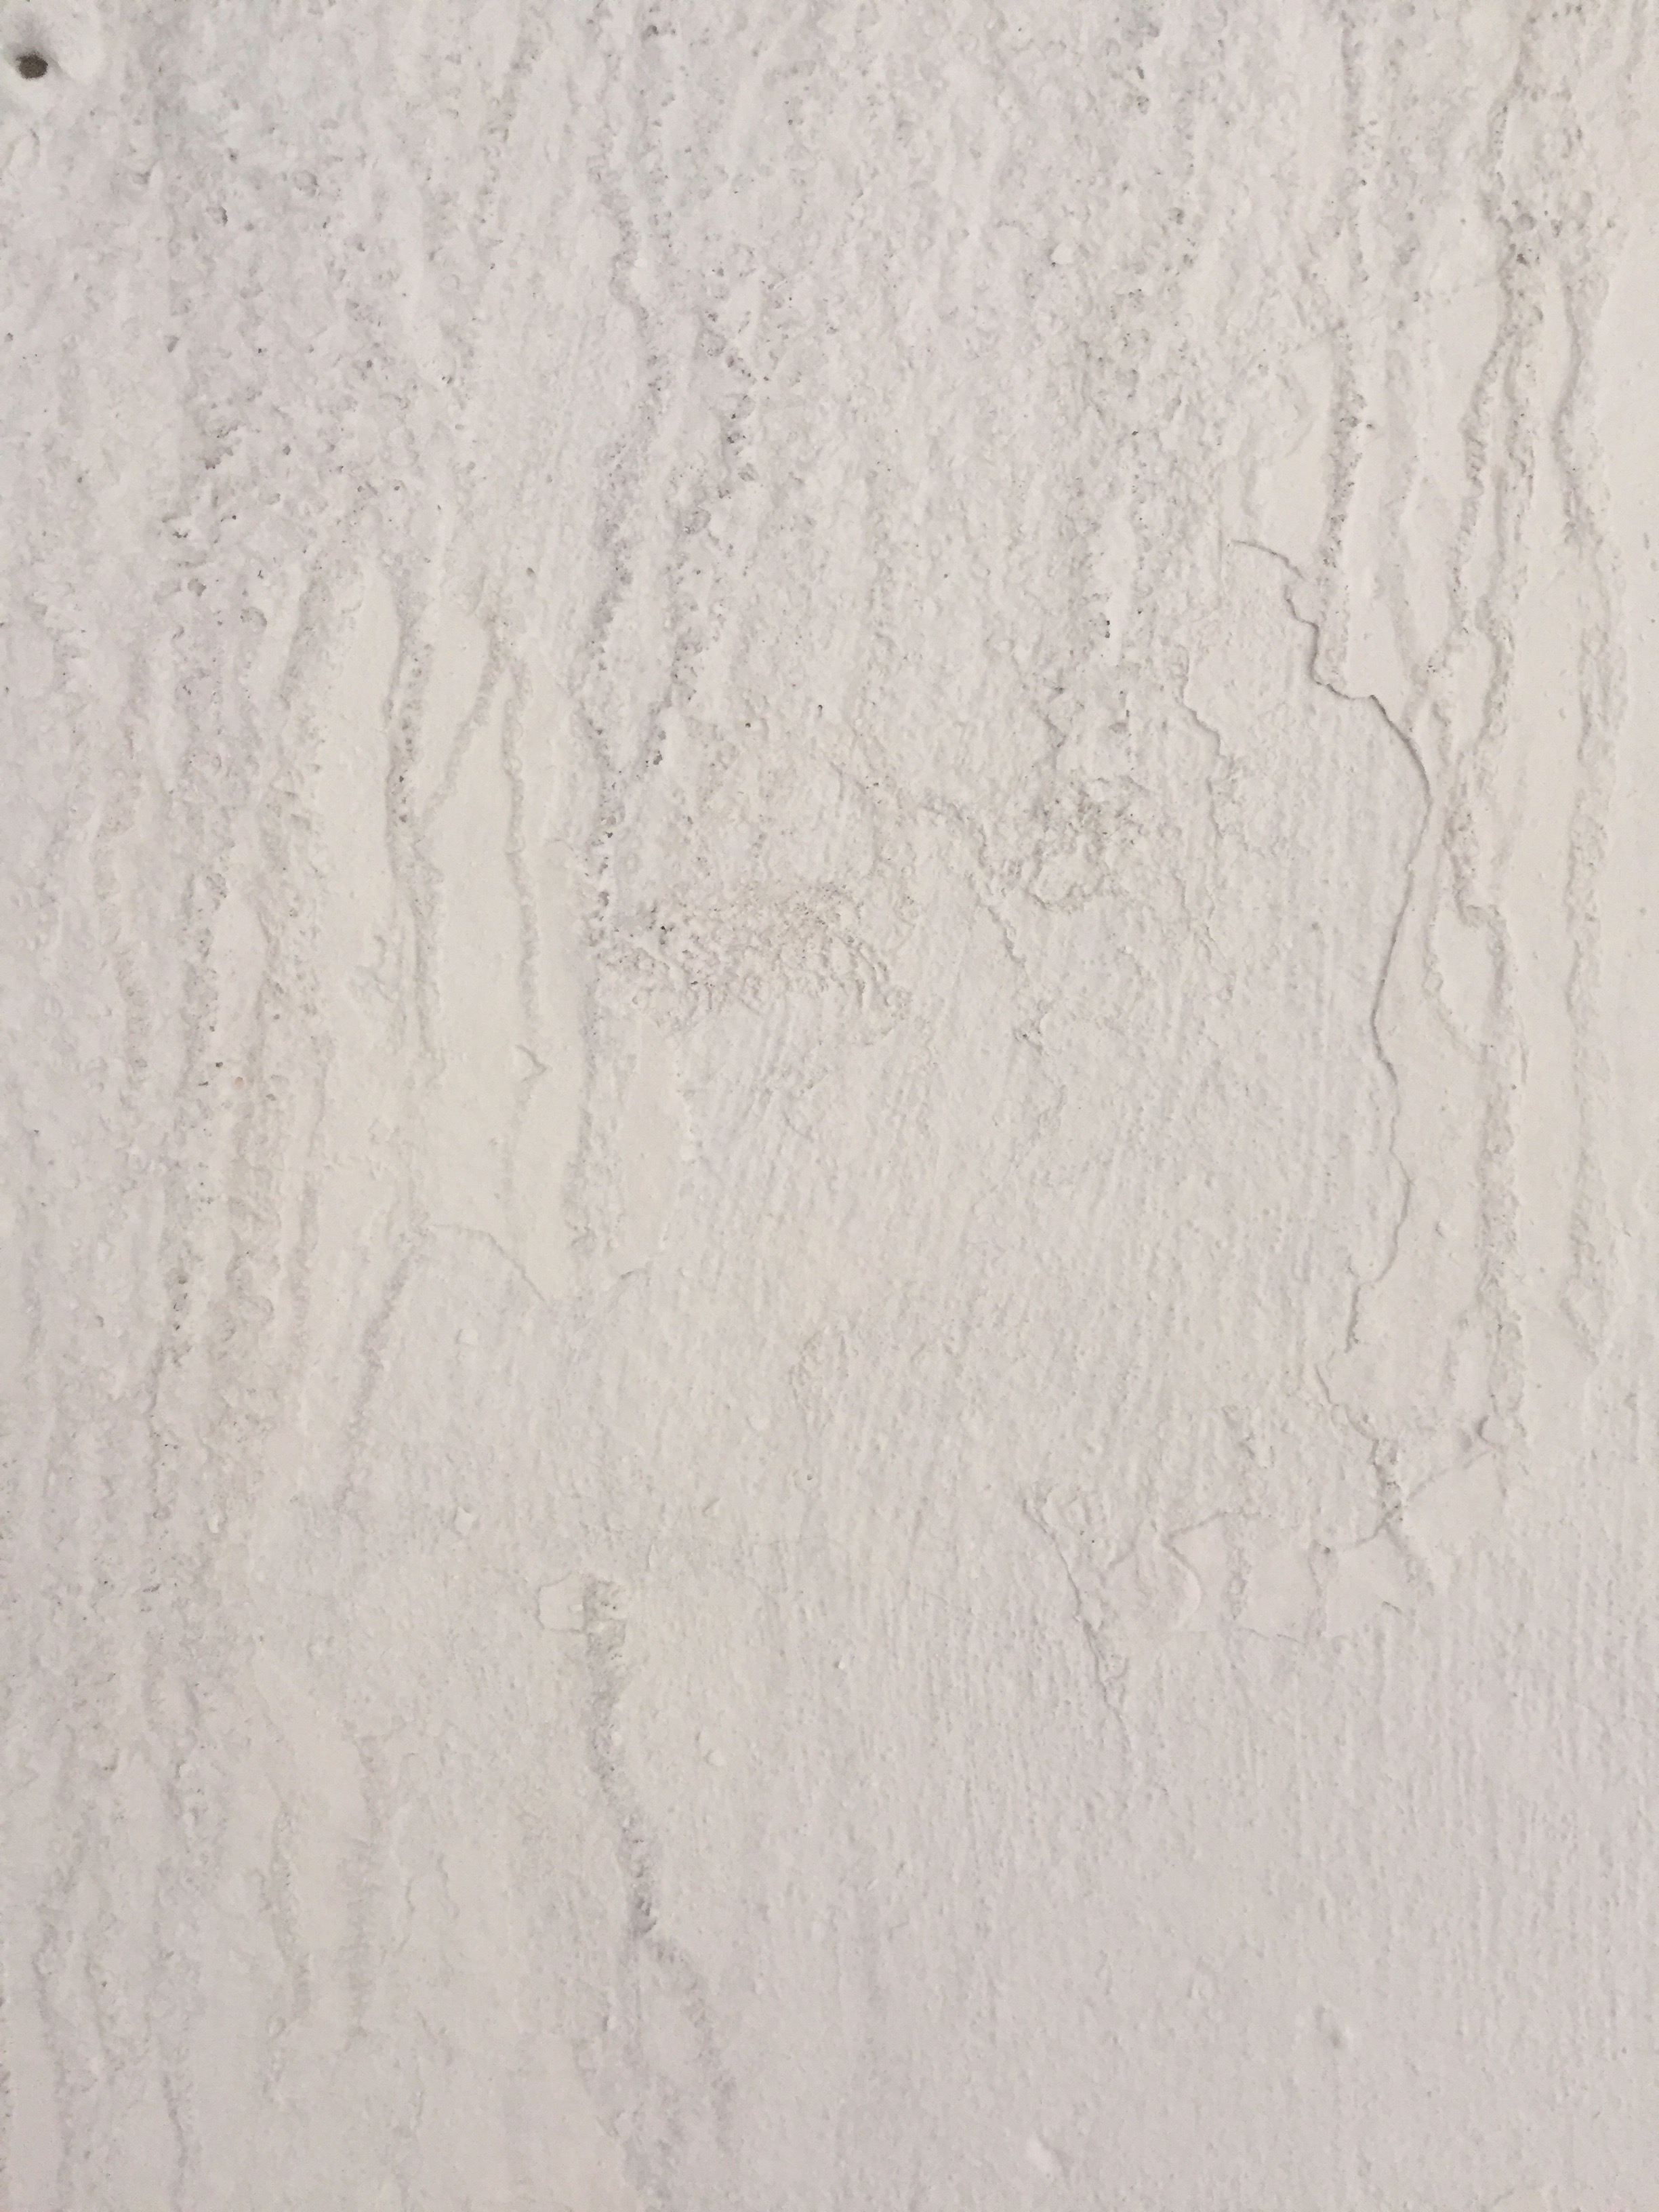 Layers Of Off White Paint Chipping On Concrete Wall Free Textures